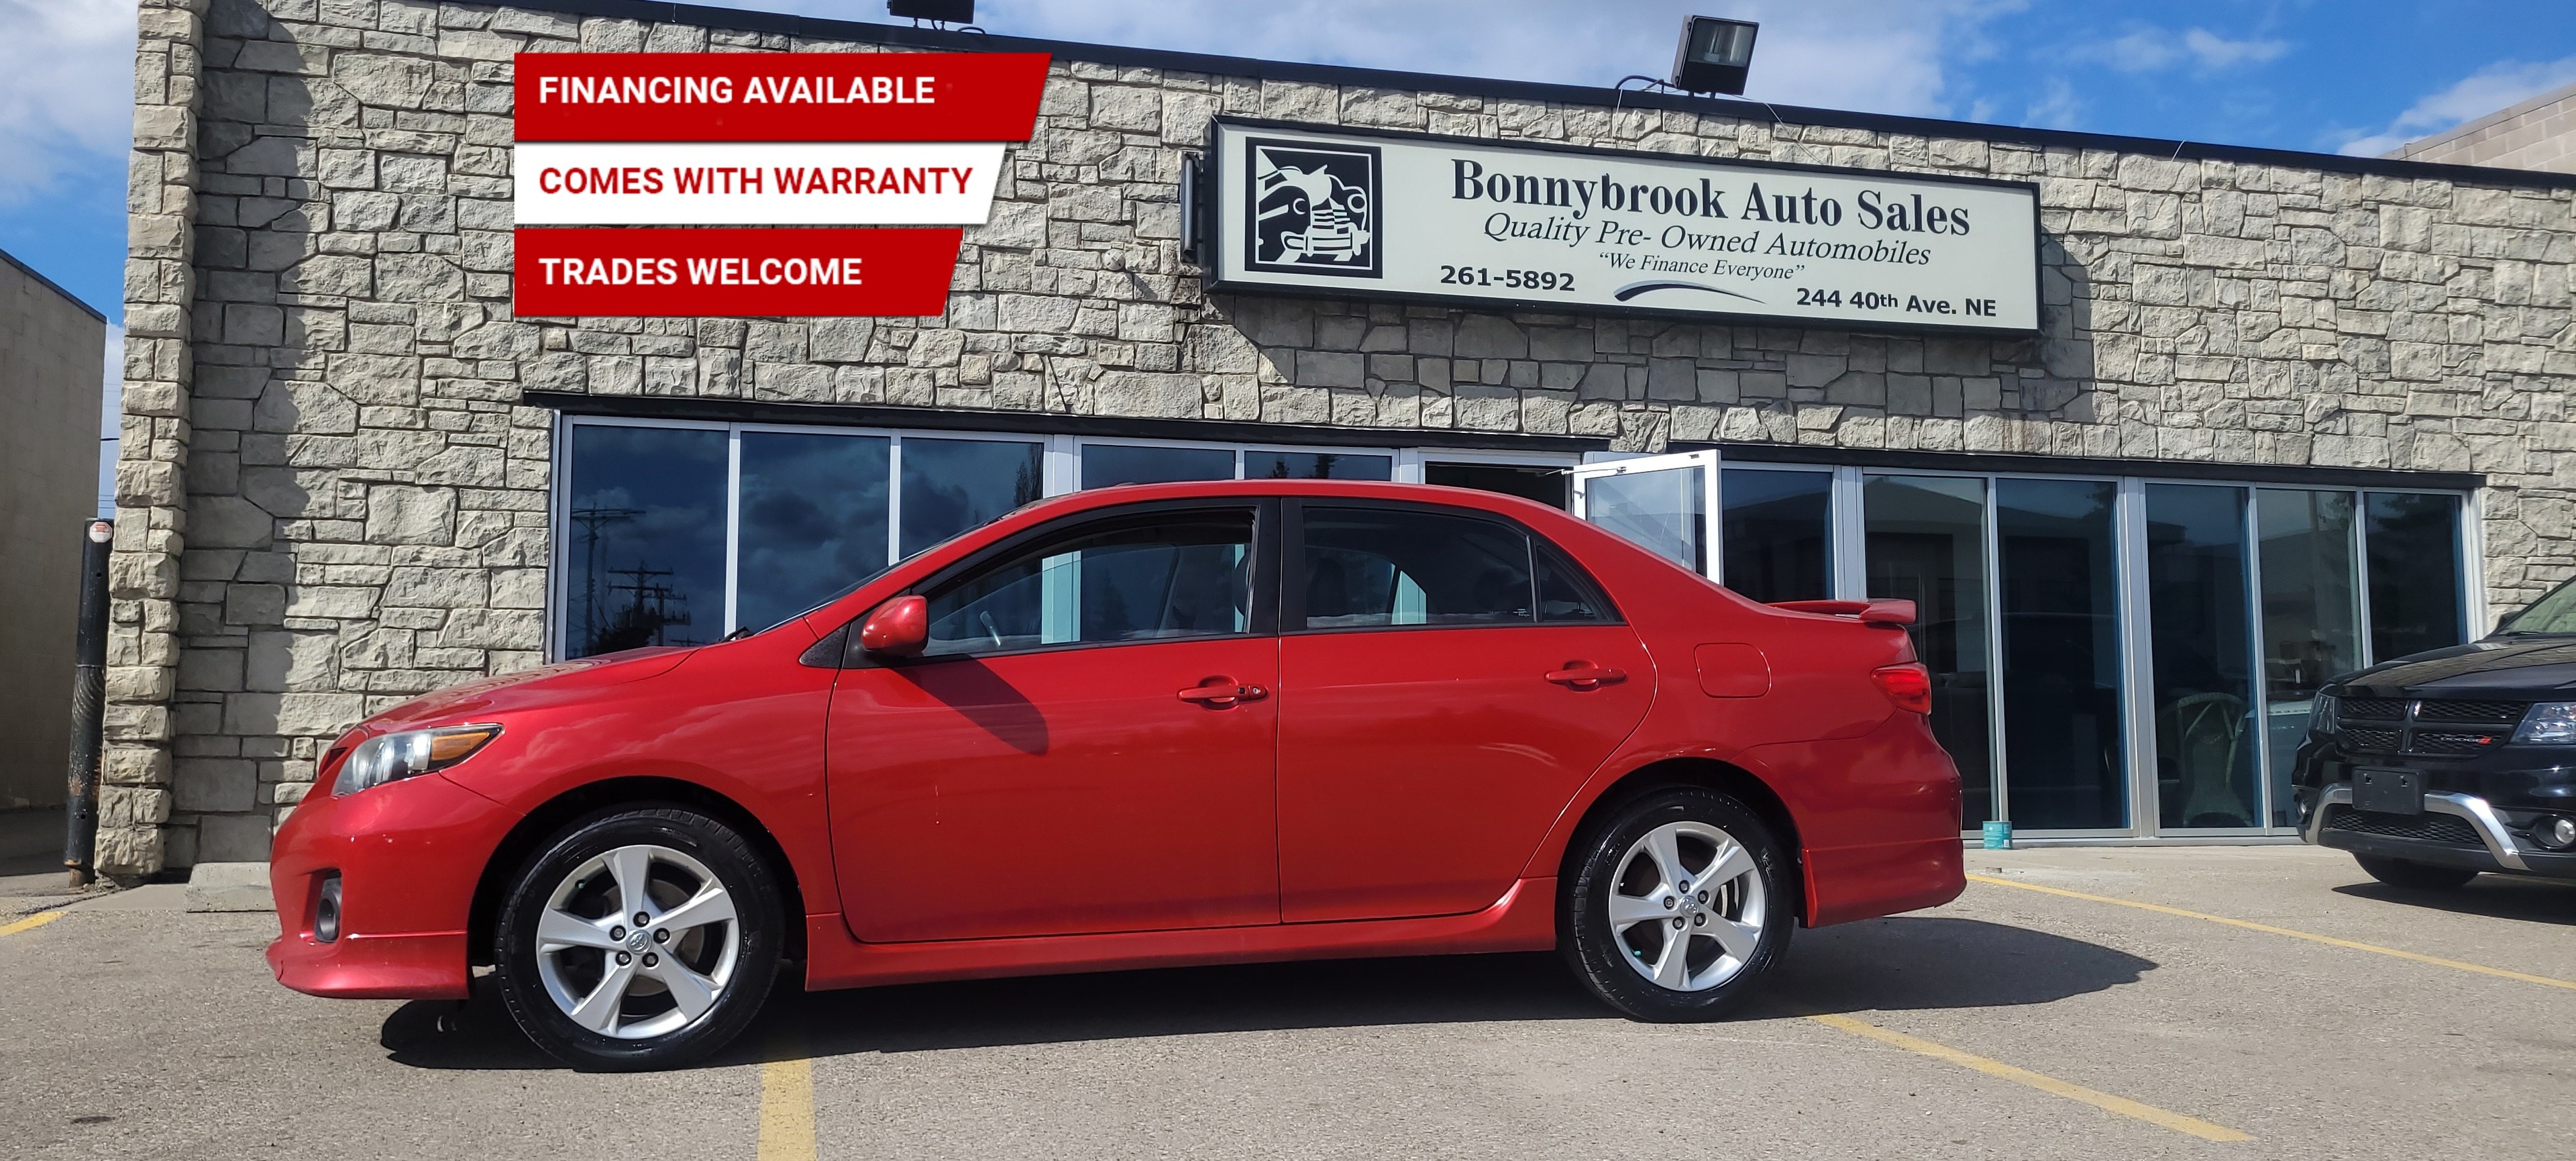 2013 Toyota Corolla 4dr Auto S/LEATHER/HEATED SEATS/SUNROOF/NAVIGATION